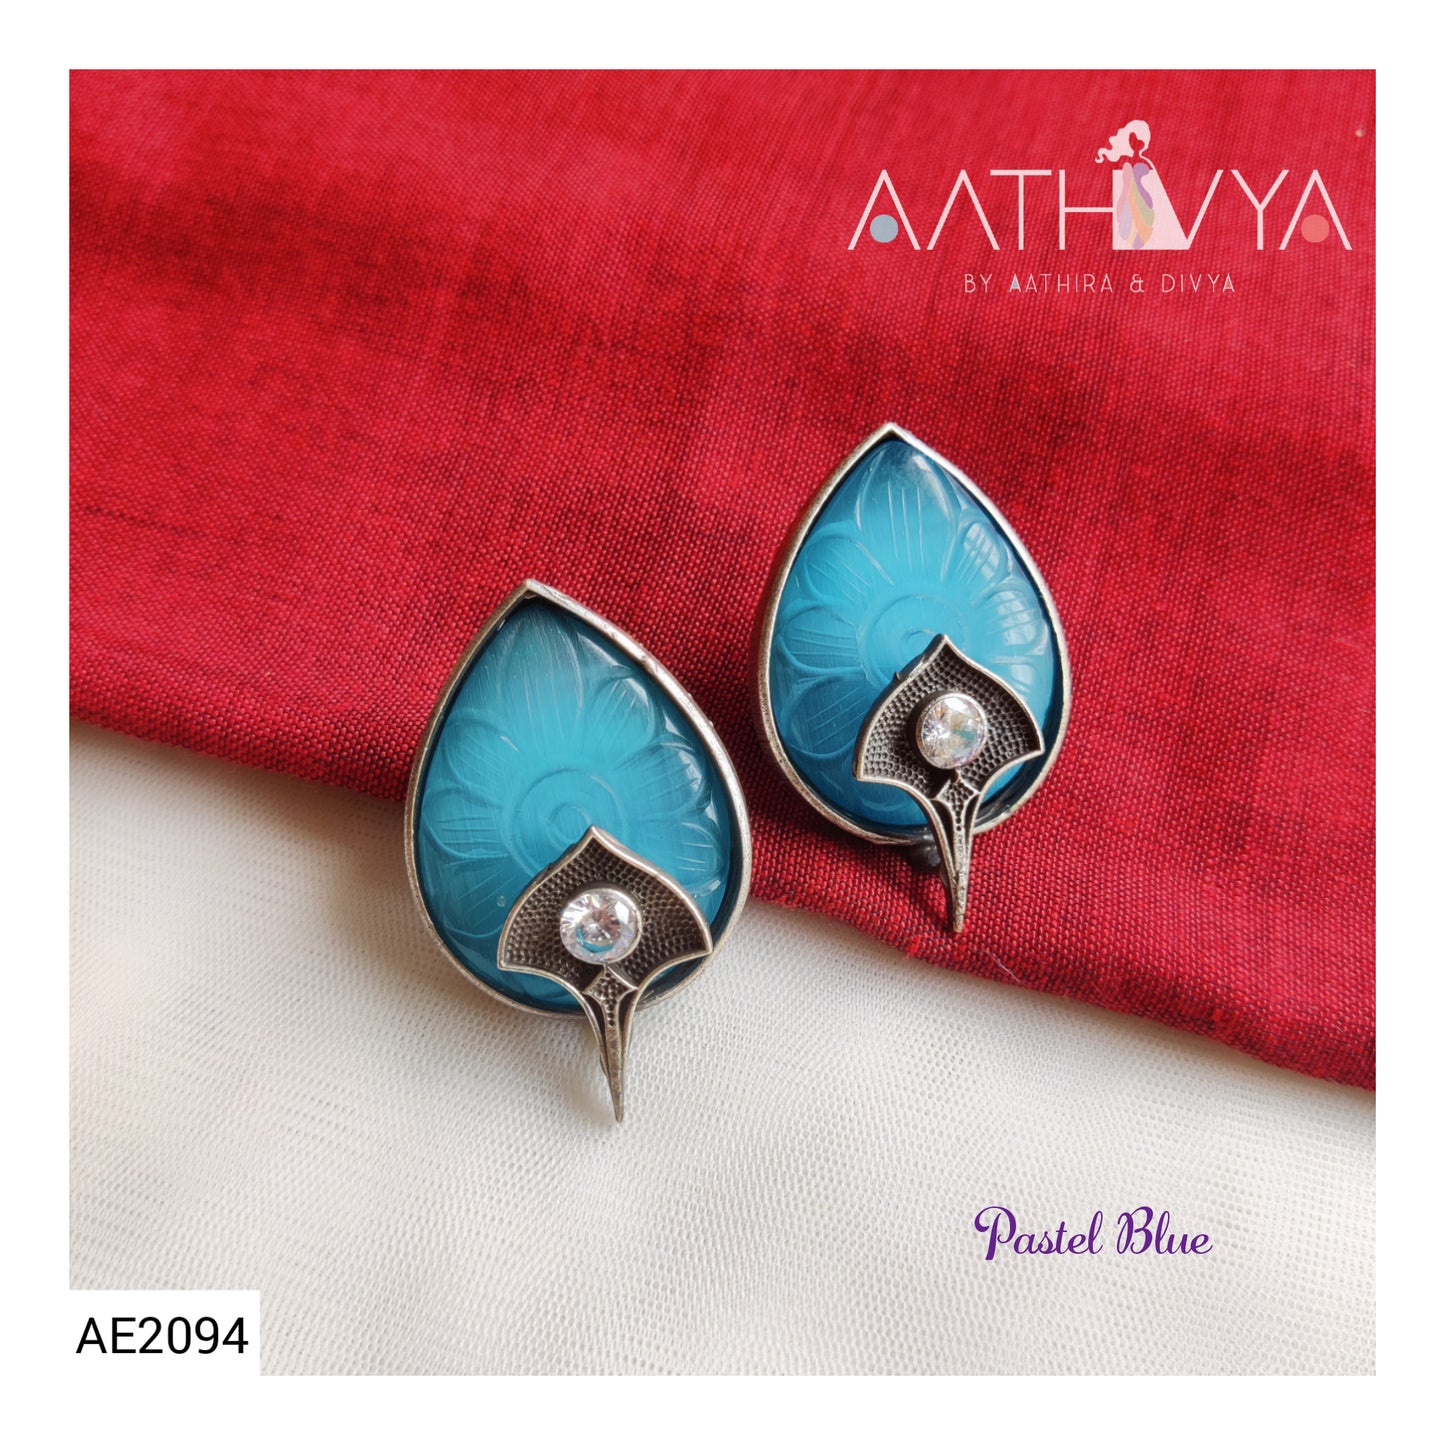 CARVED STONE STATEMENT STUDS - AE2094